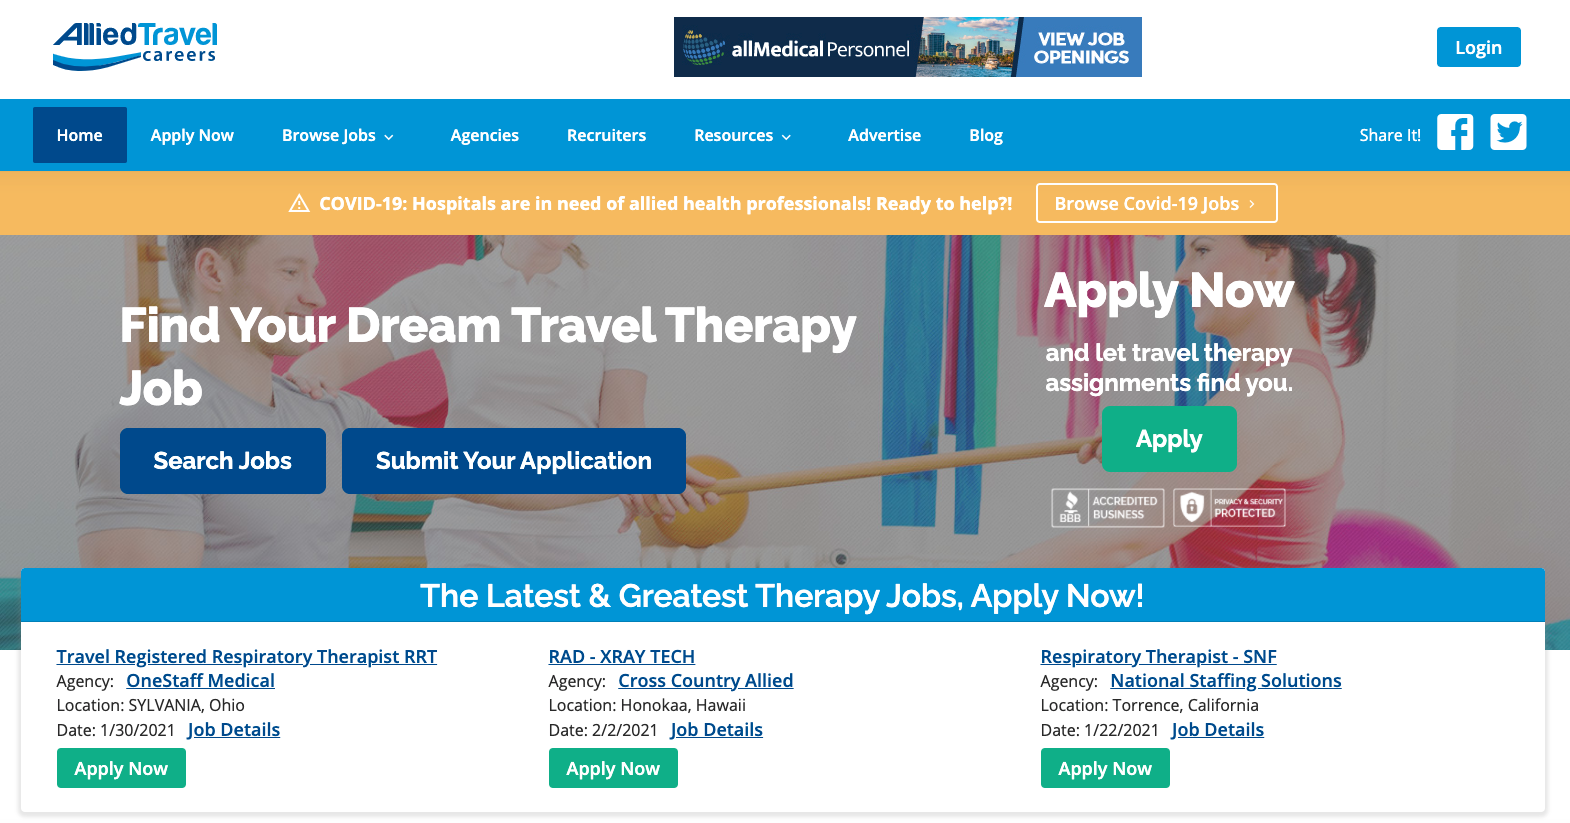 Allied Travel Careers TrackFive